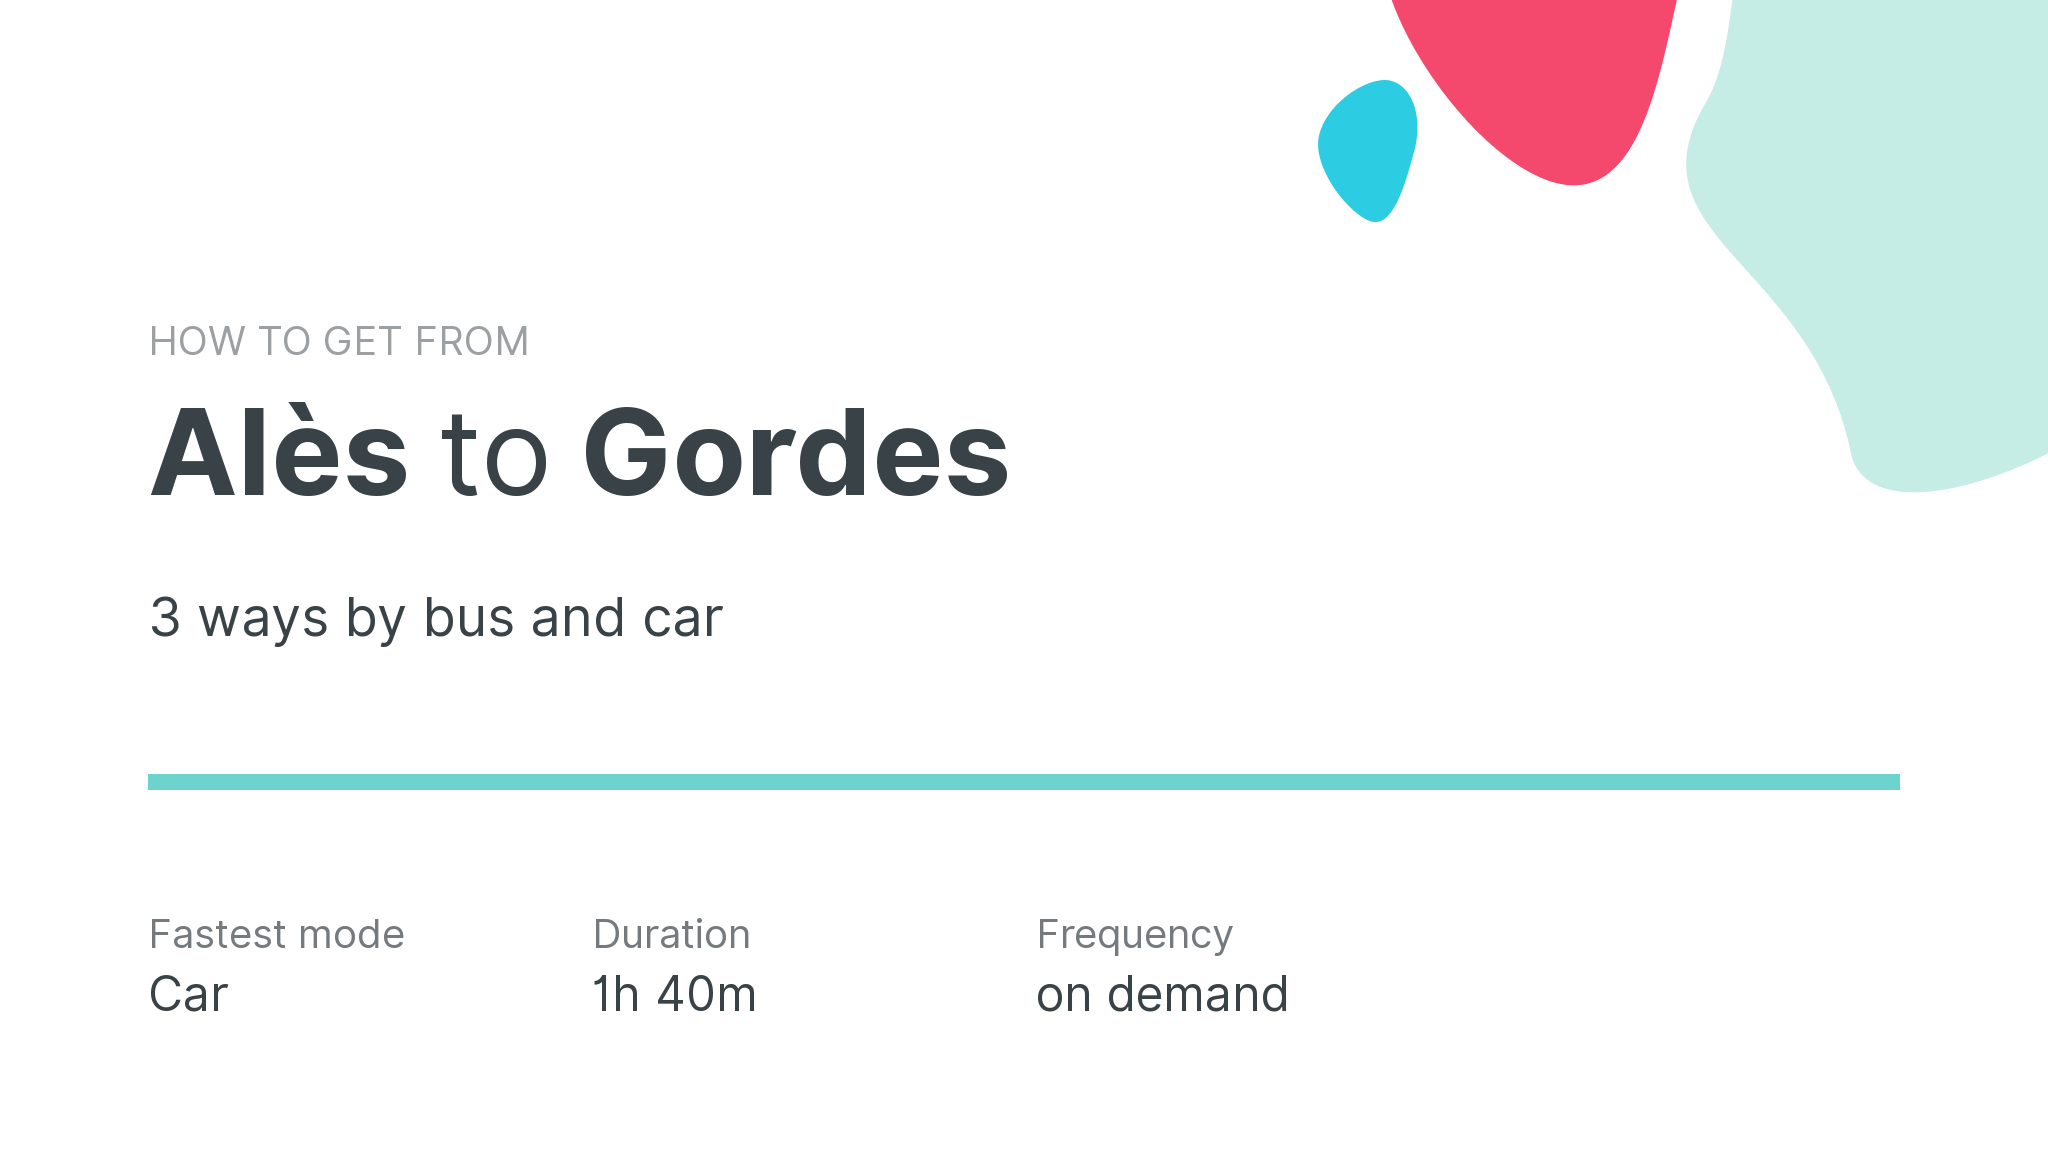 How do I get from Alès to Gordes